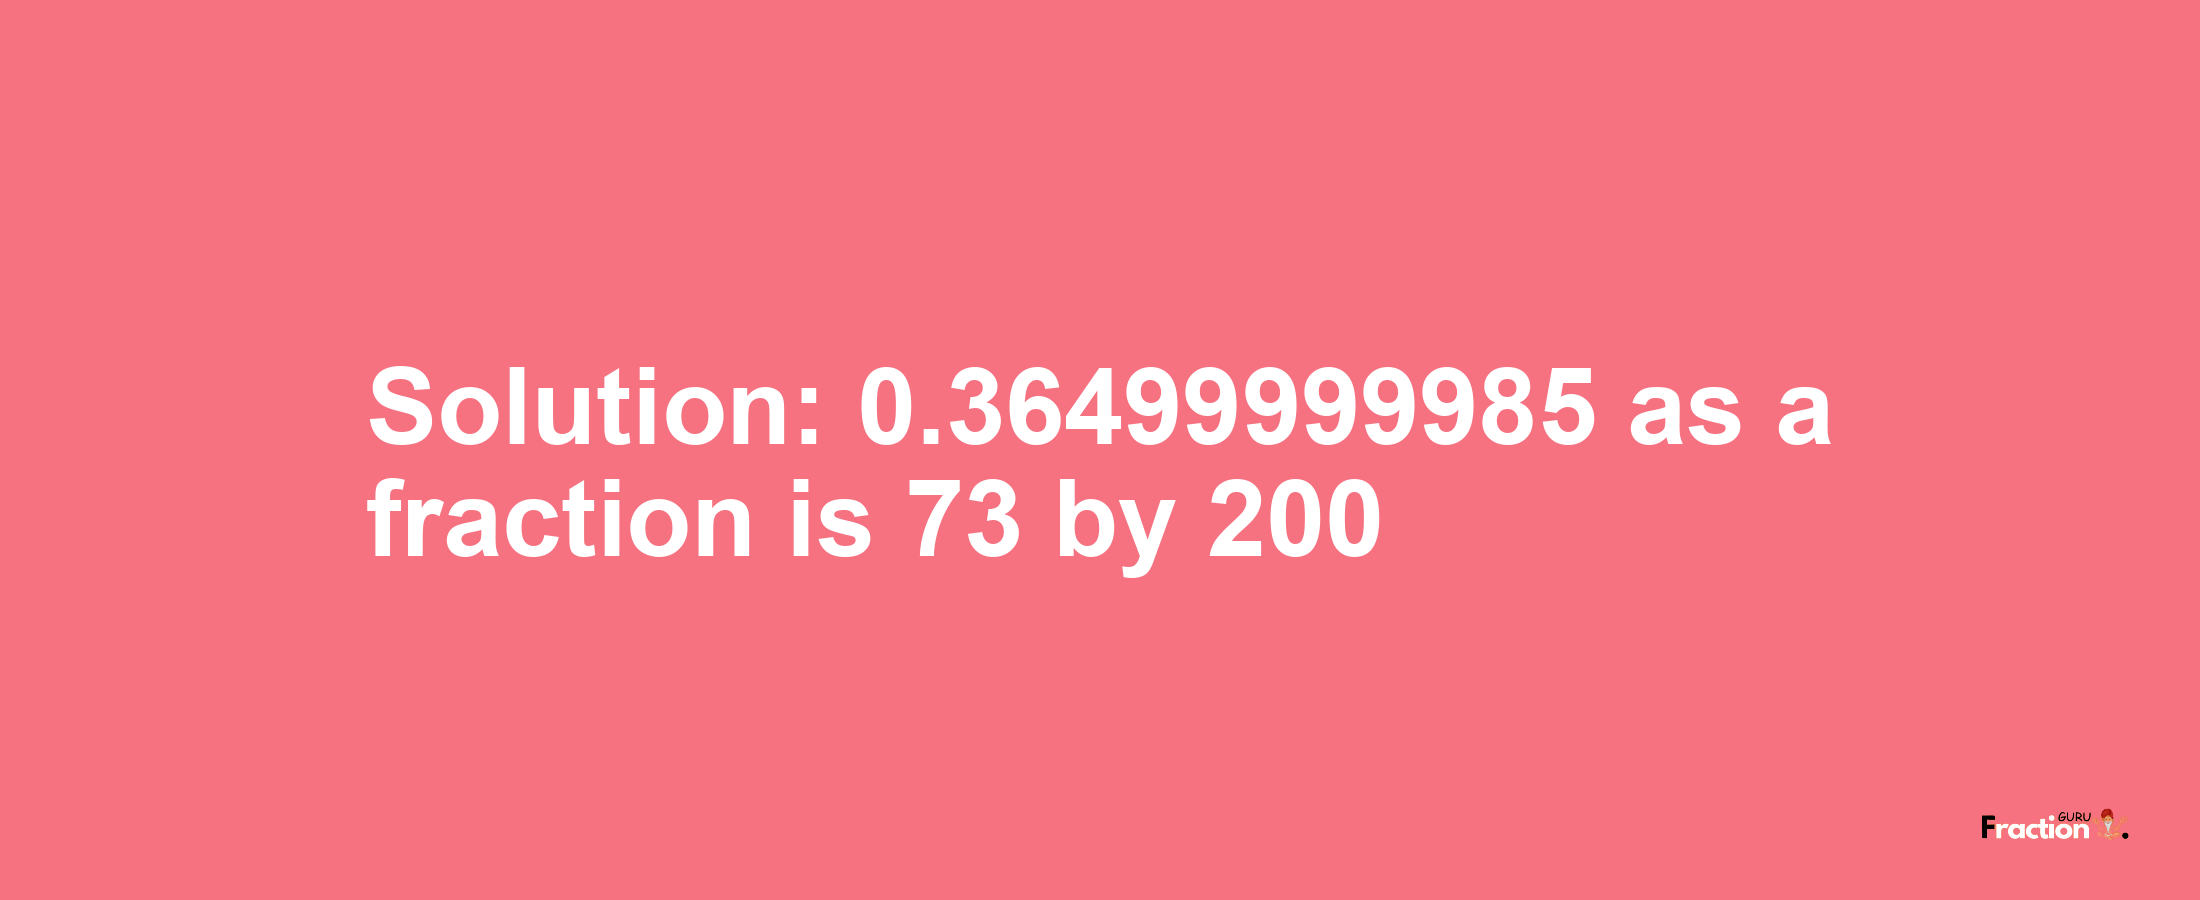 Solution:0.36499999985 as a fraction is 73/200